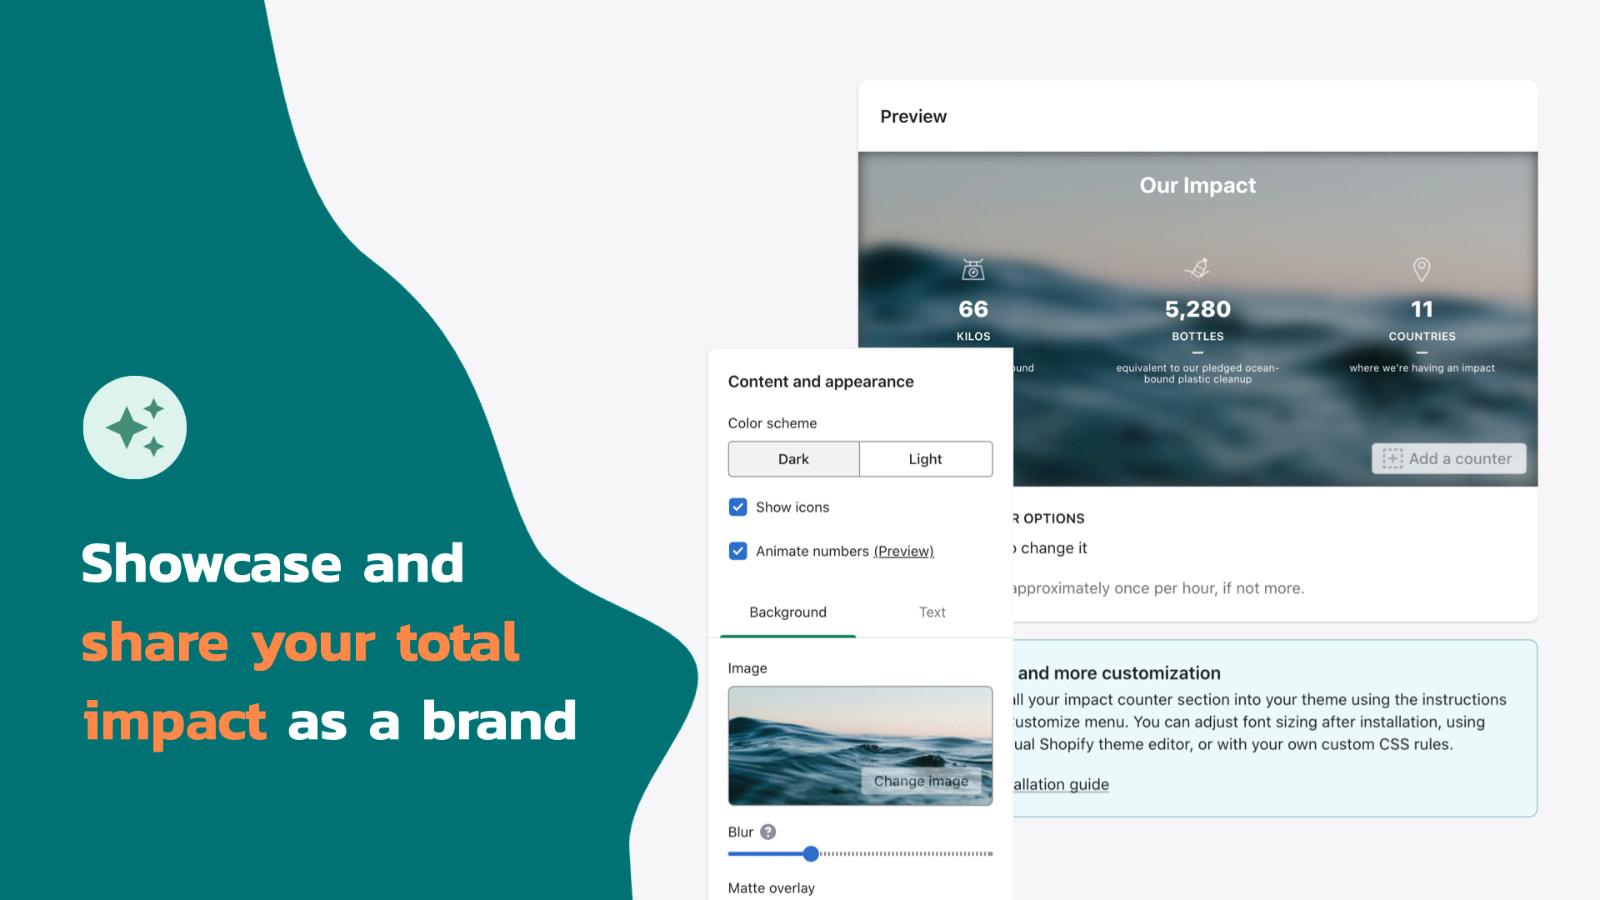 Showcase and share your total impact as a brand